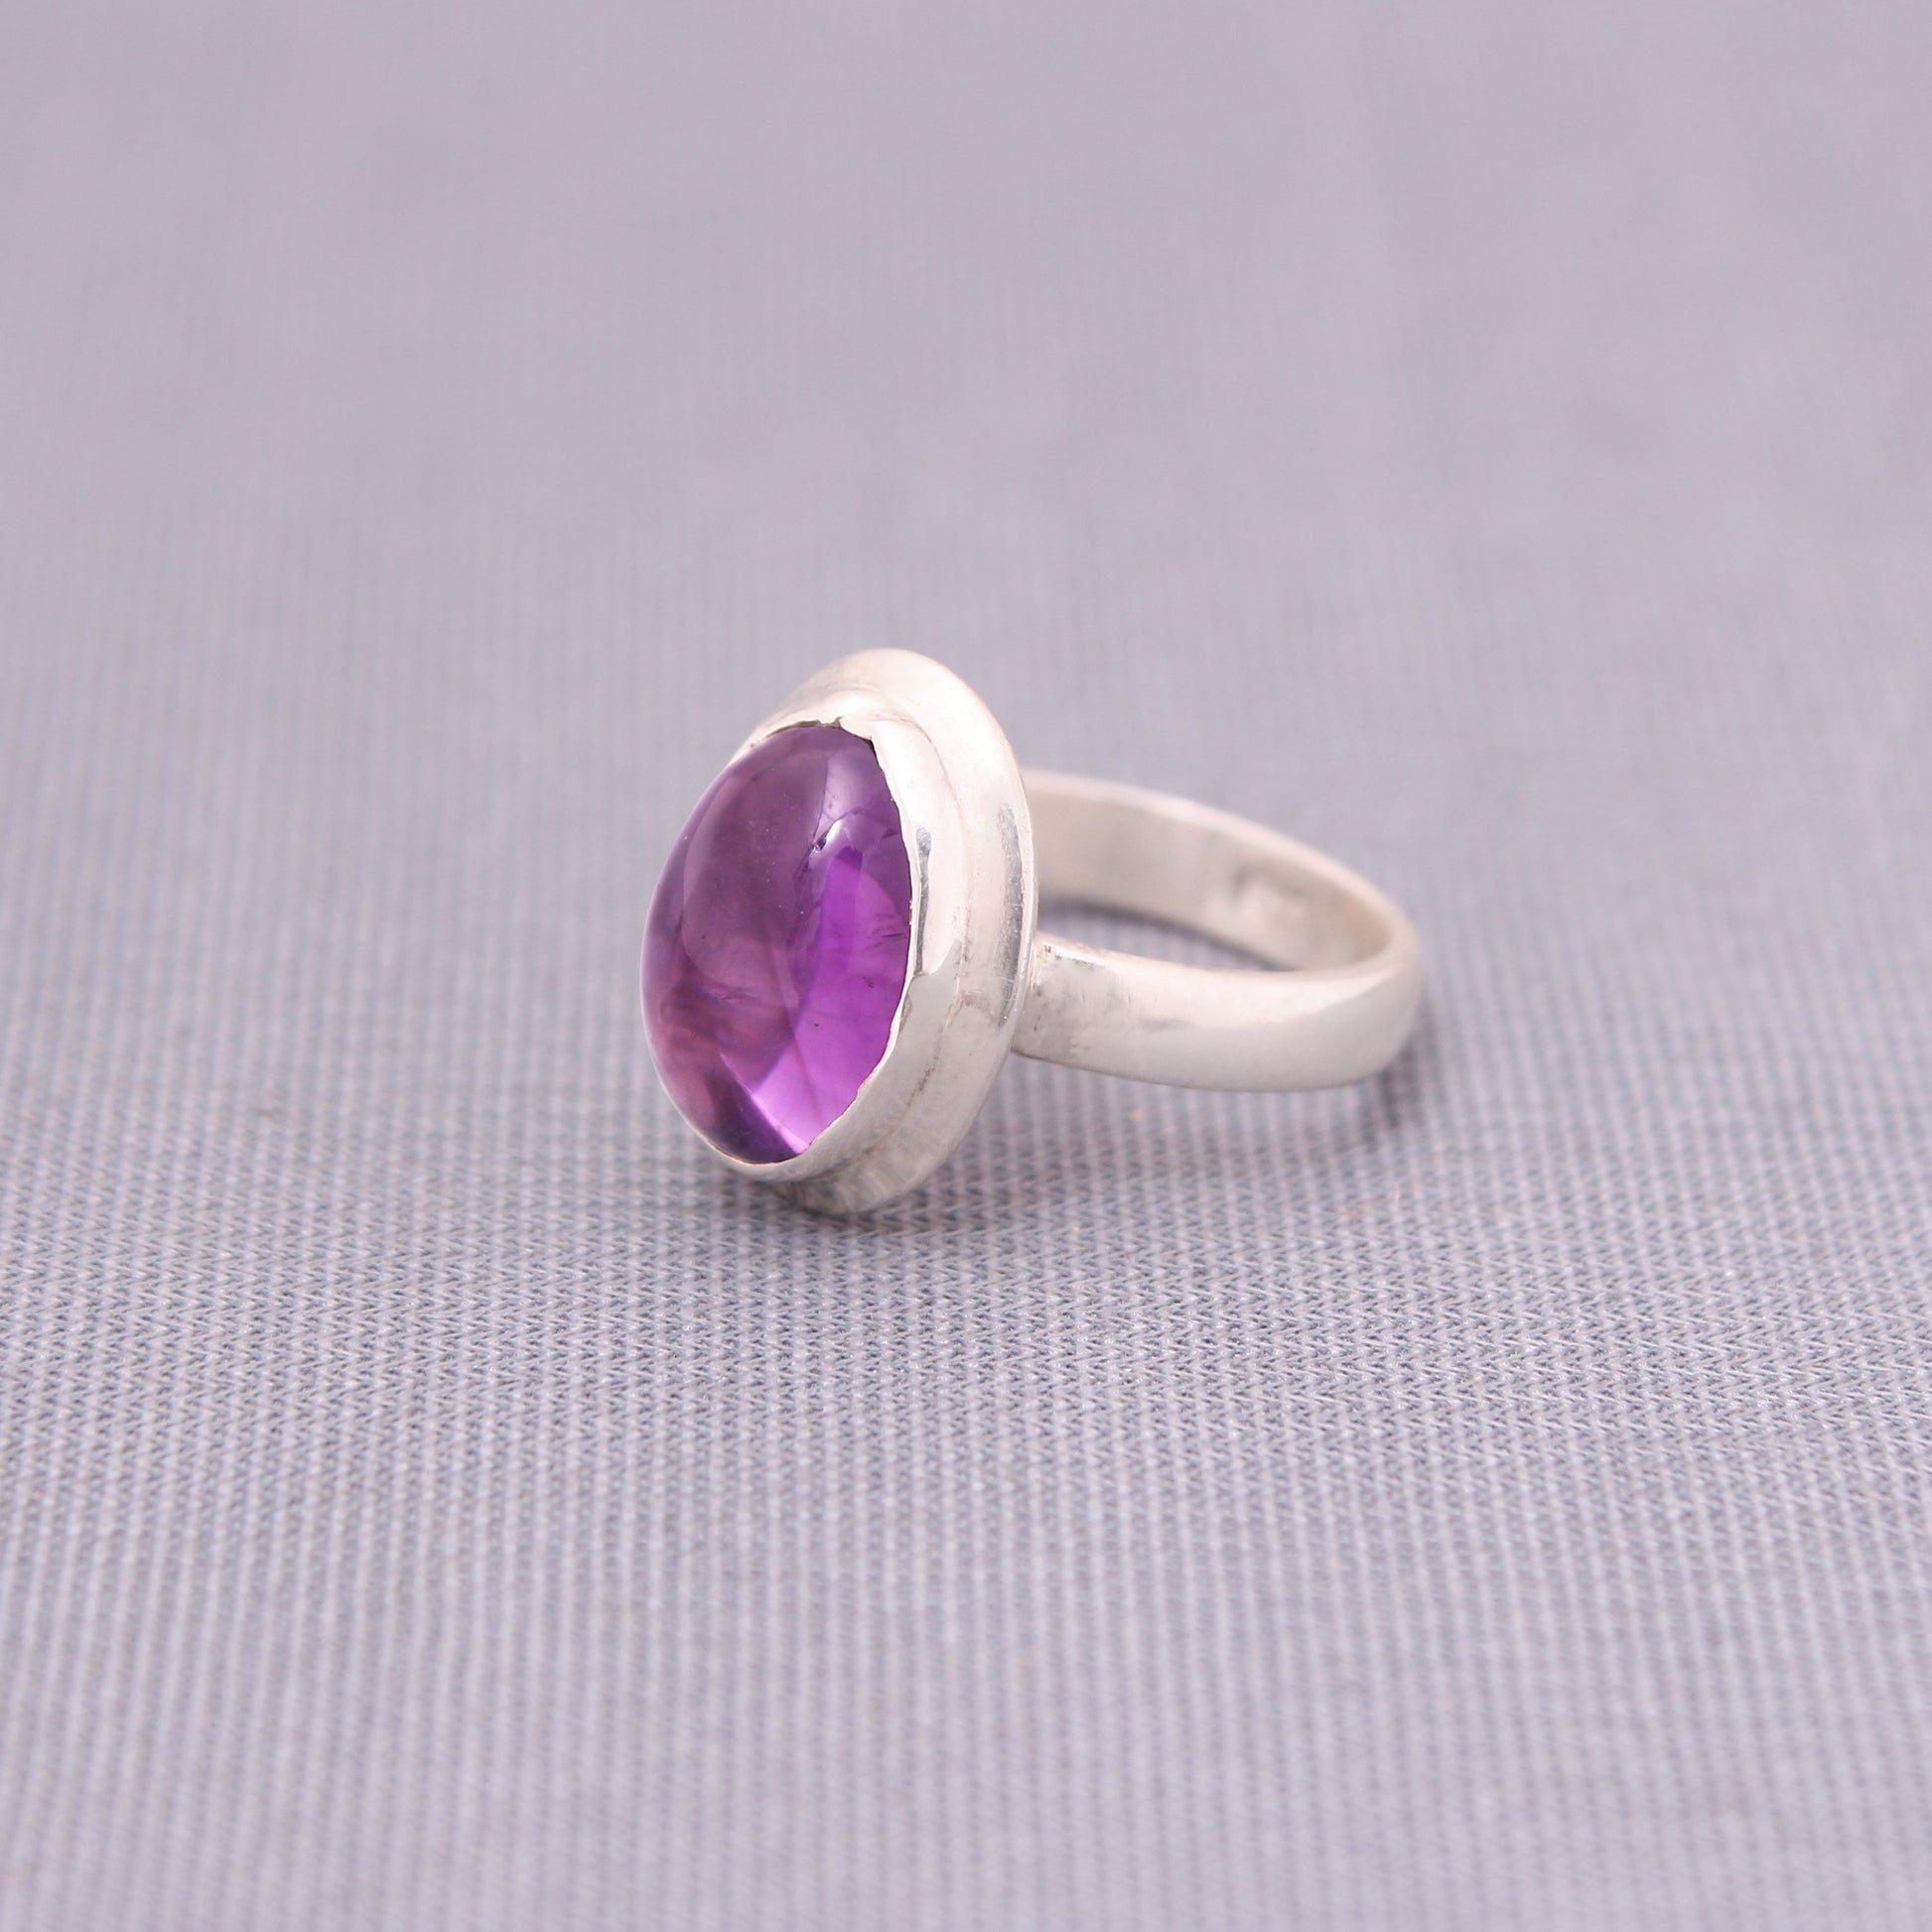 Natural Purple Amethyst 925 Sterling Silver Ring Size - 6.5 US GemsRush